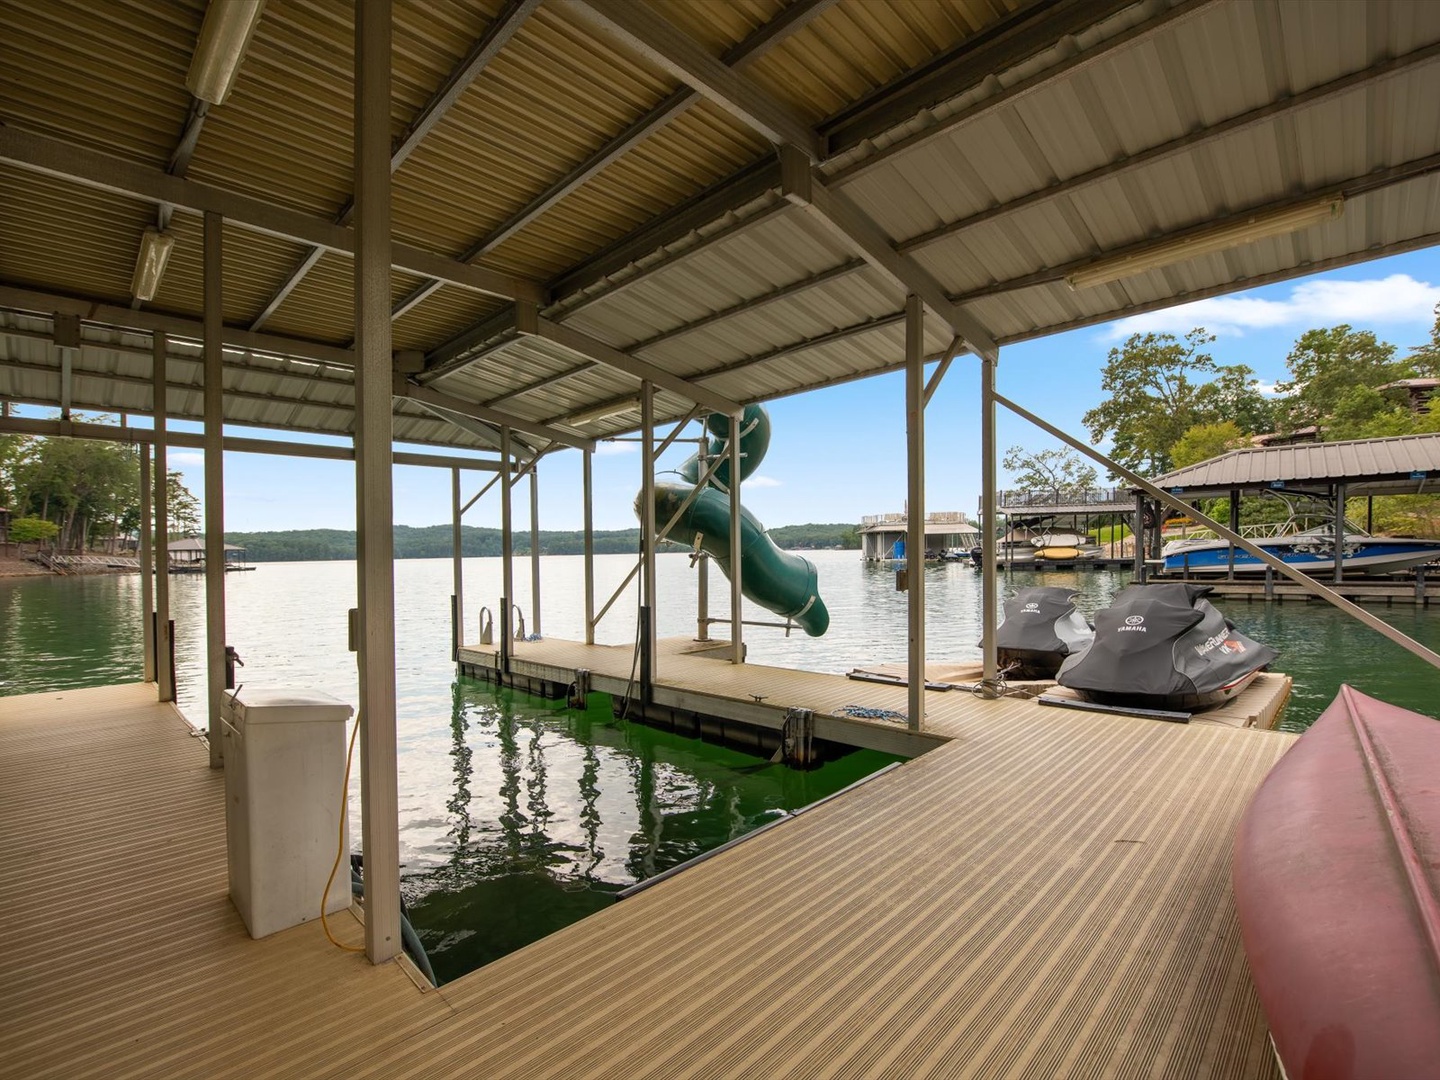 Medley Sunset Cove - Bottom level of the dock with boat dock